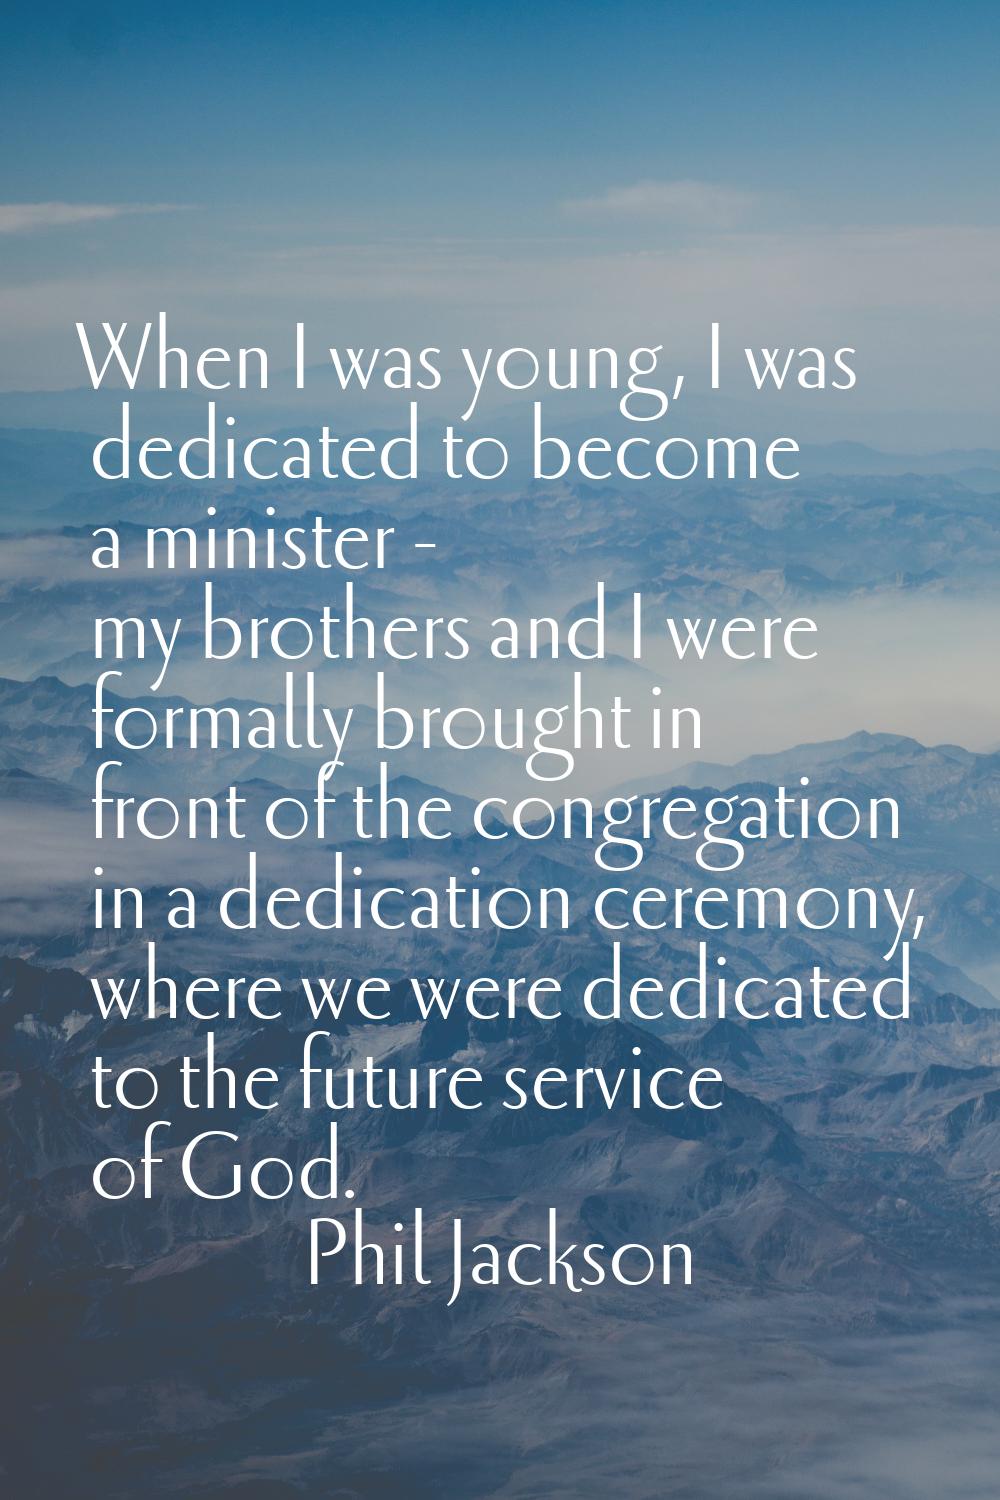 When I was young, I was dedicated to become a minister - my brothers and I were formally brought in